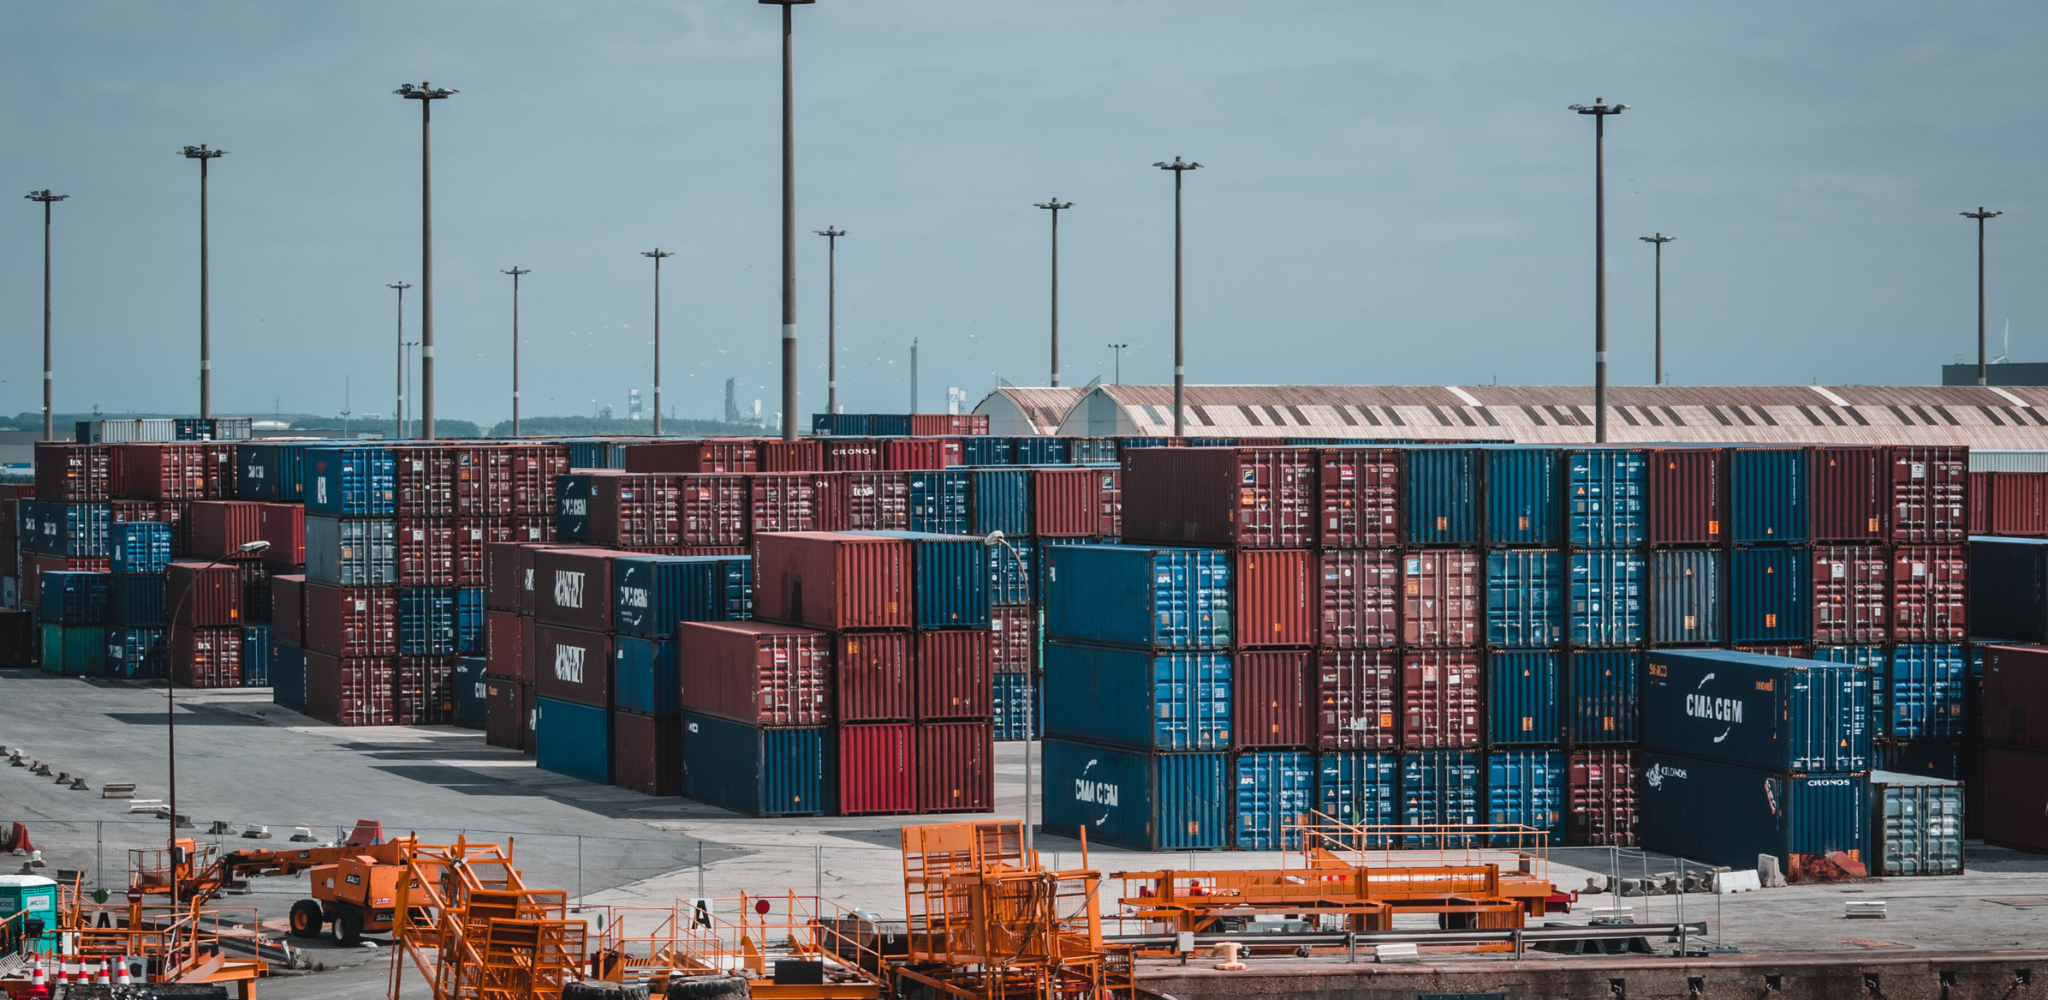 Containers at a port stacked